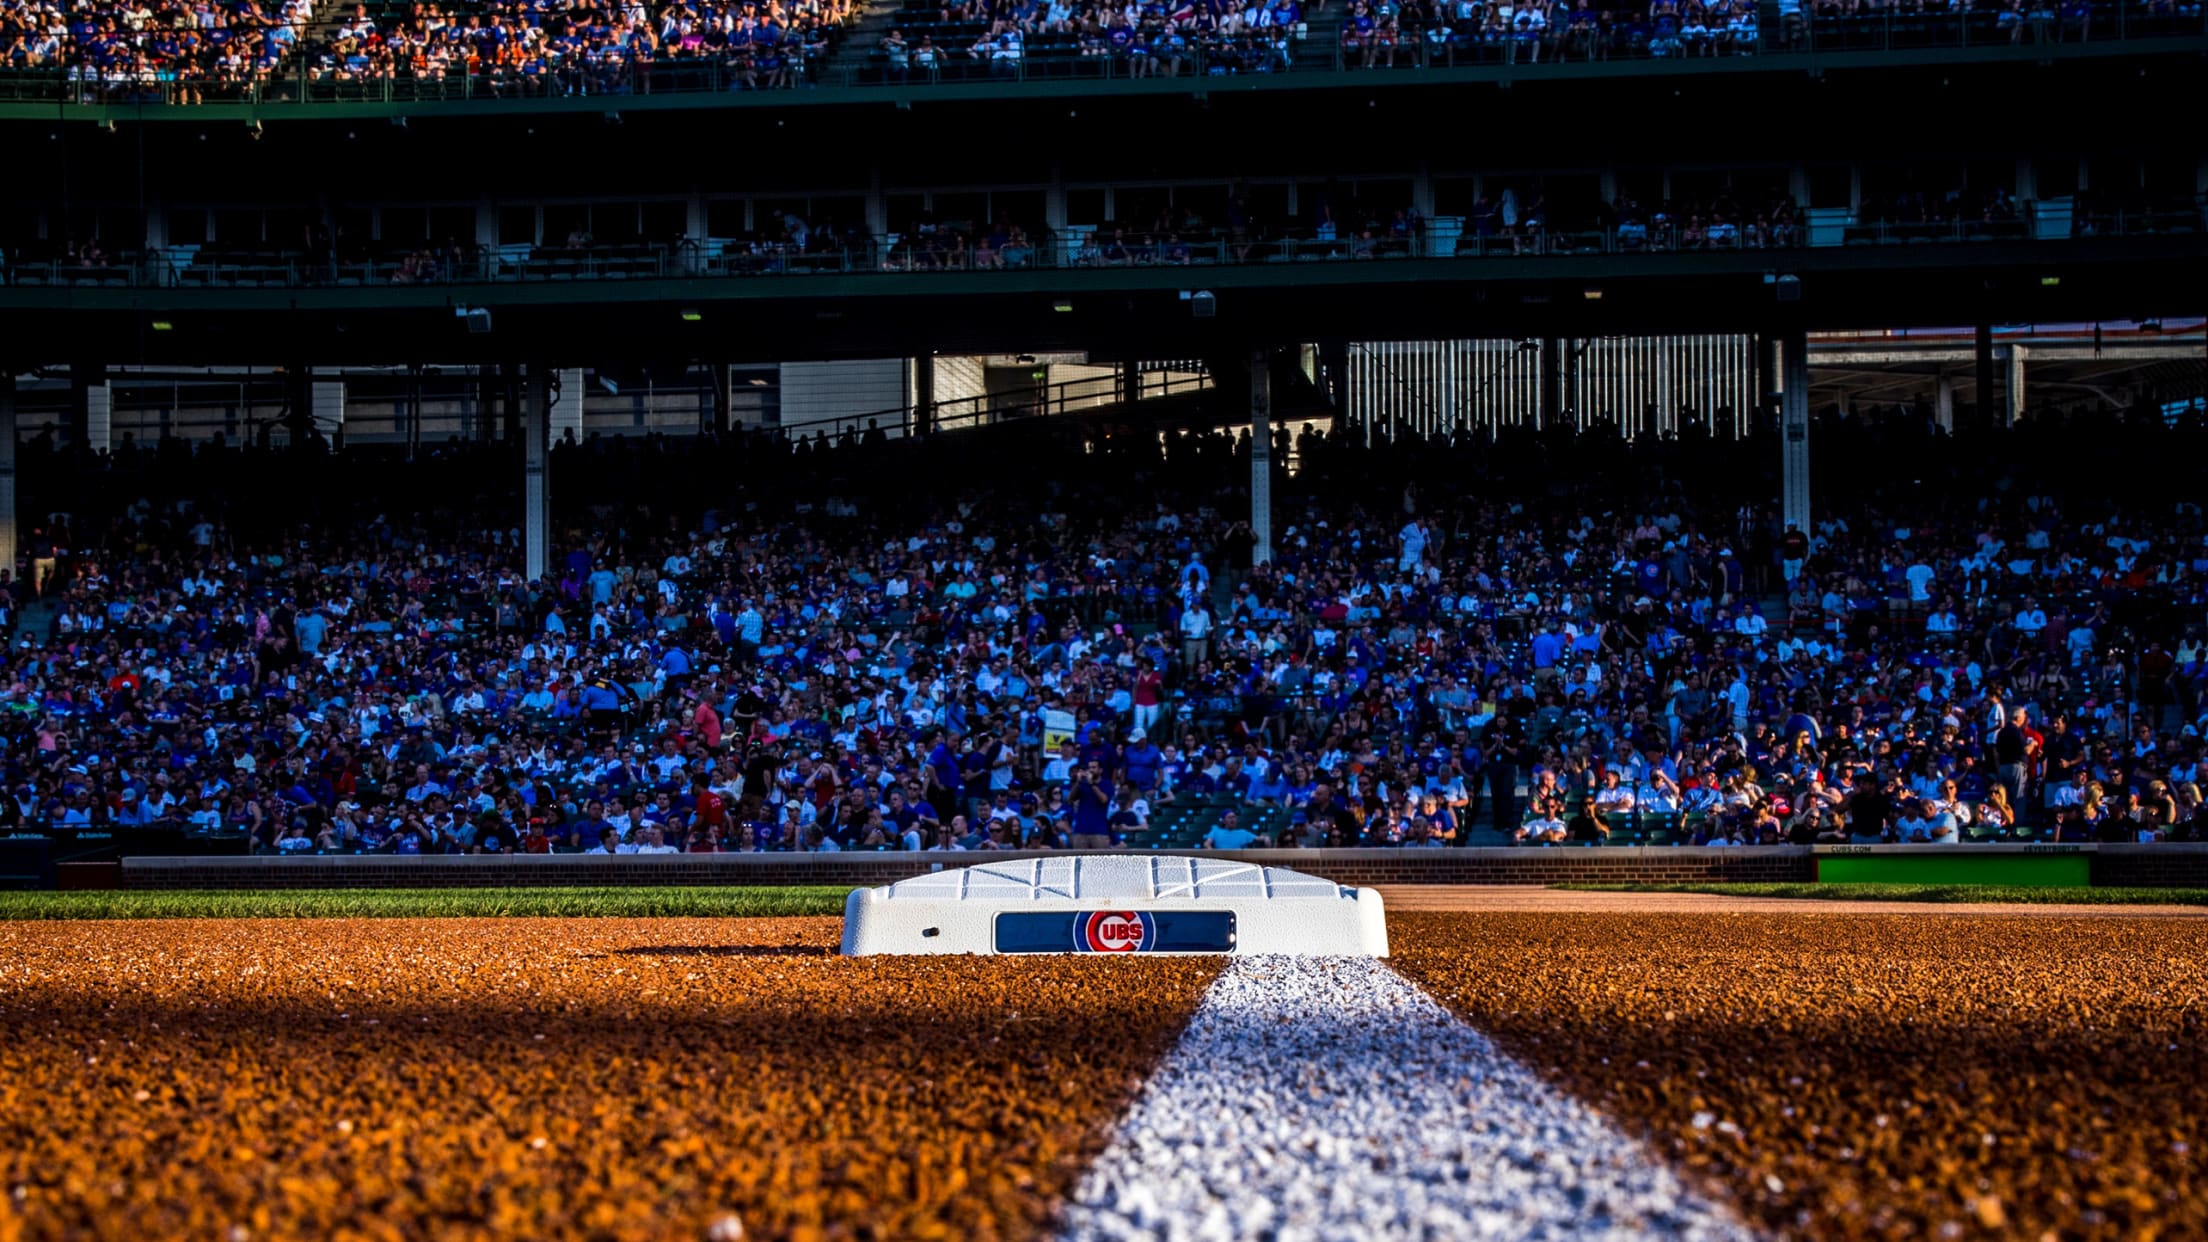 Getting to Wrigley for Opening Day will take patience